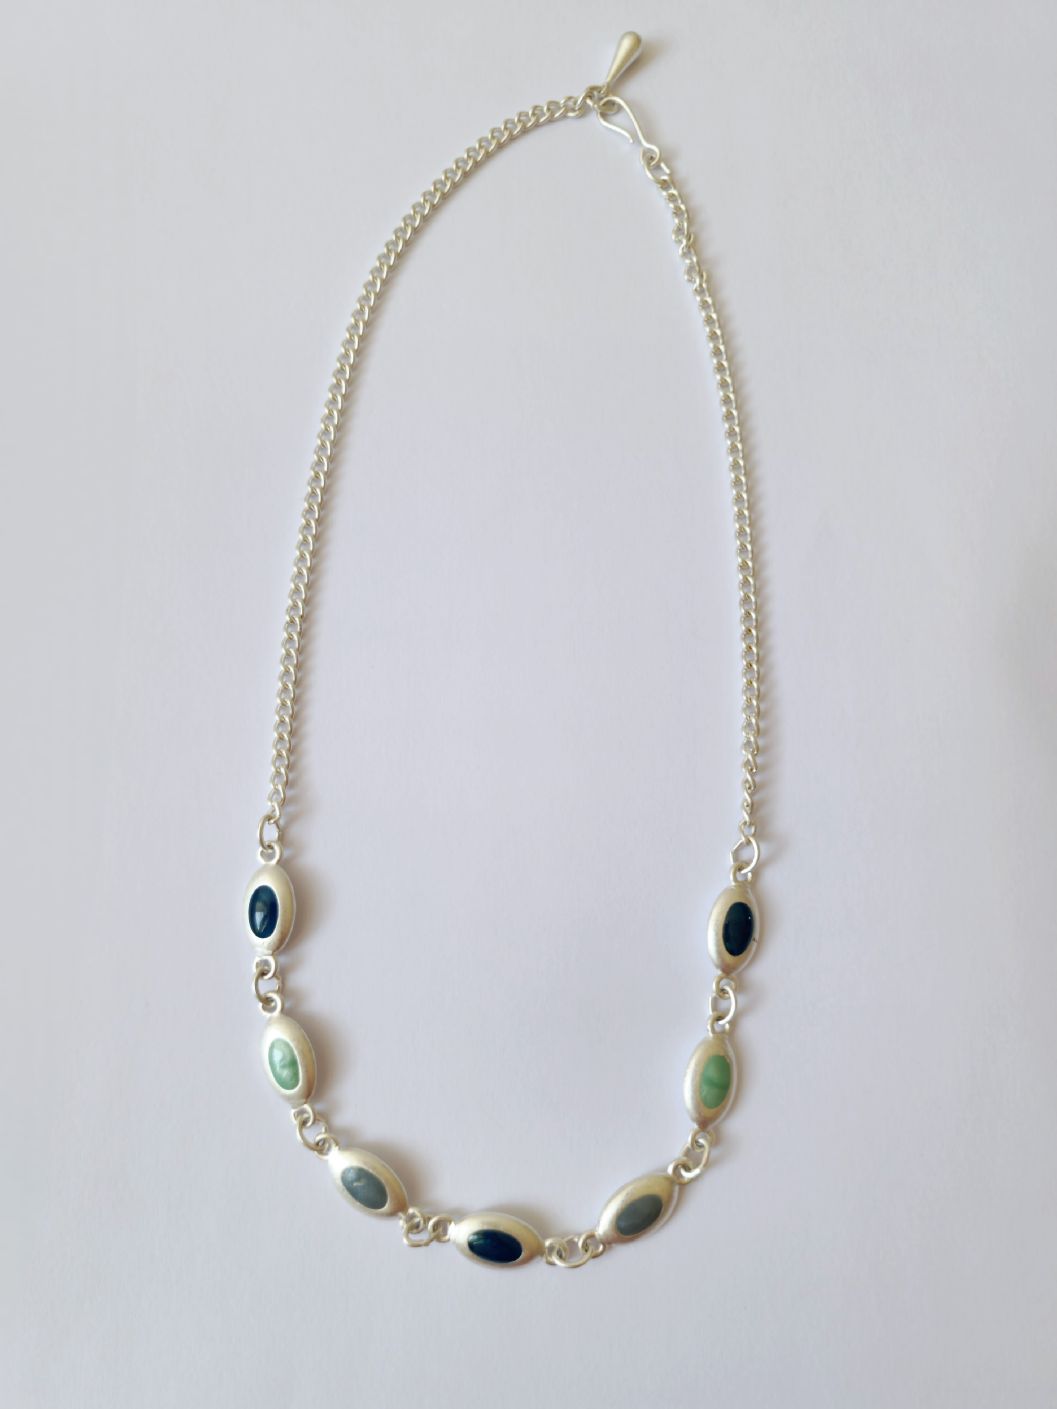 Vintage Silver Plated Curb Chain Necklace with Blue Enamel